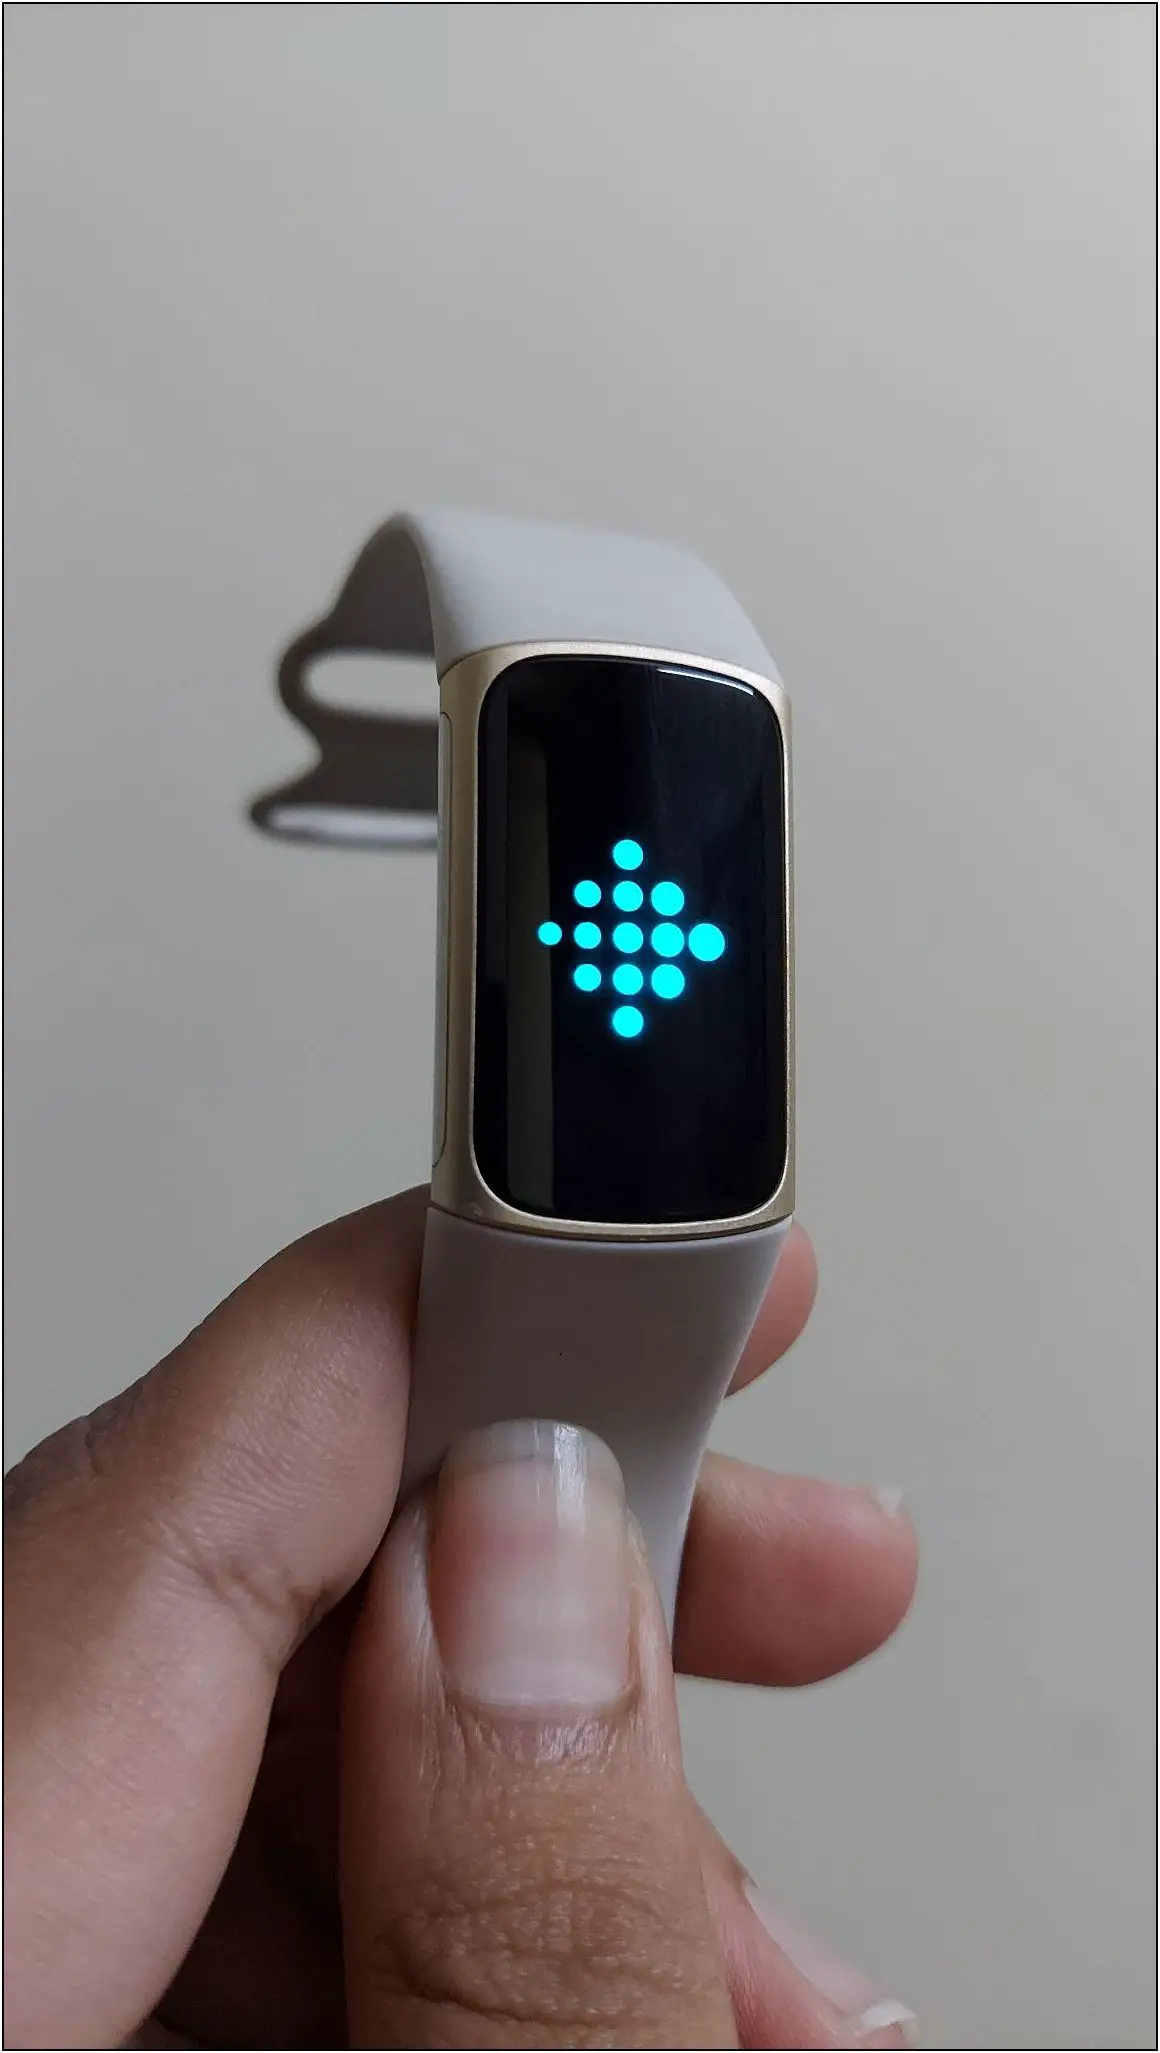 Restart Fitbit Charge 5